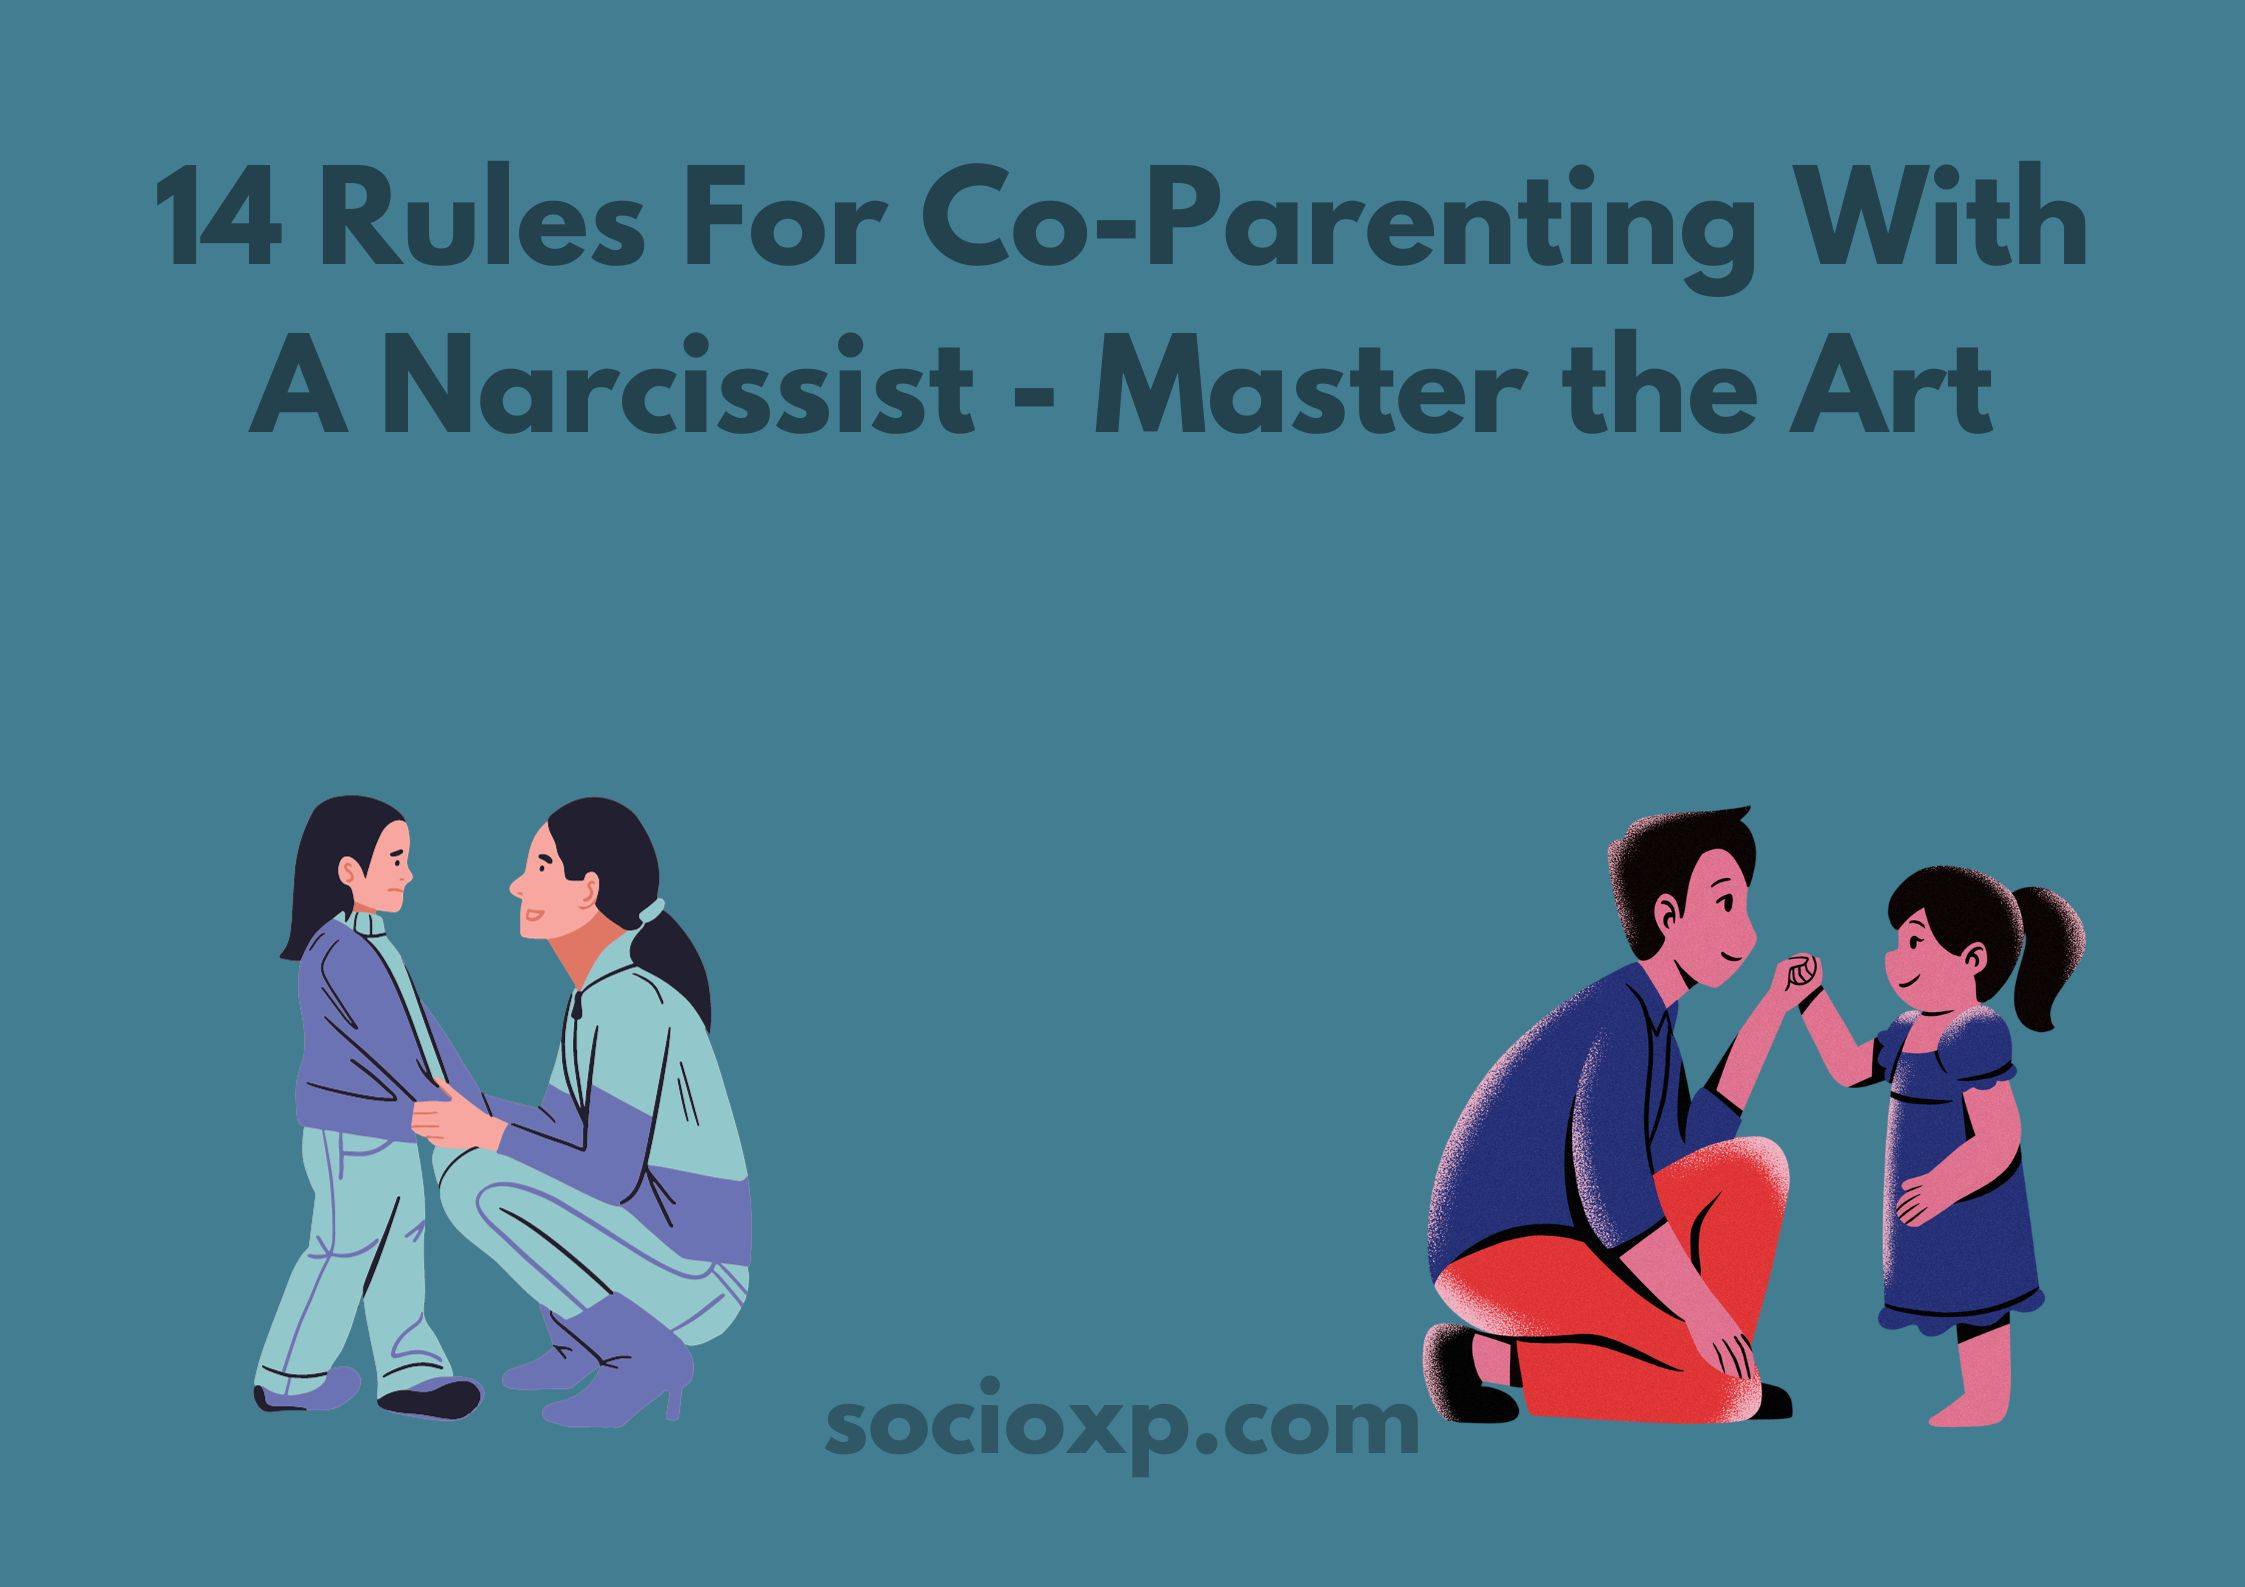 14 Rules For Co-Parenting With A Narcissist - Master the Art